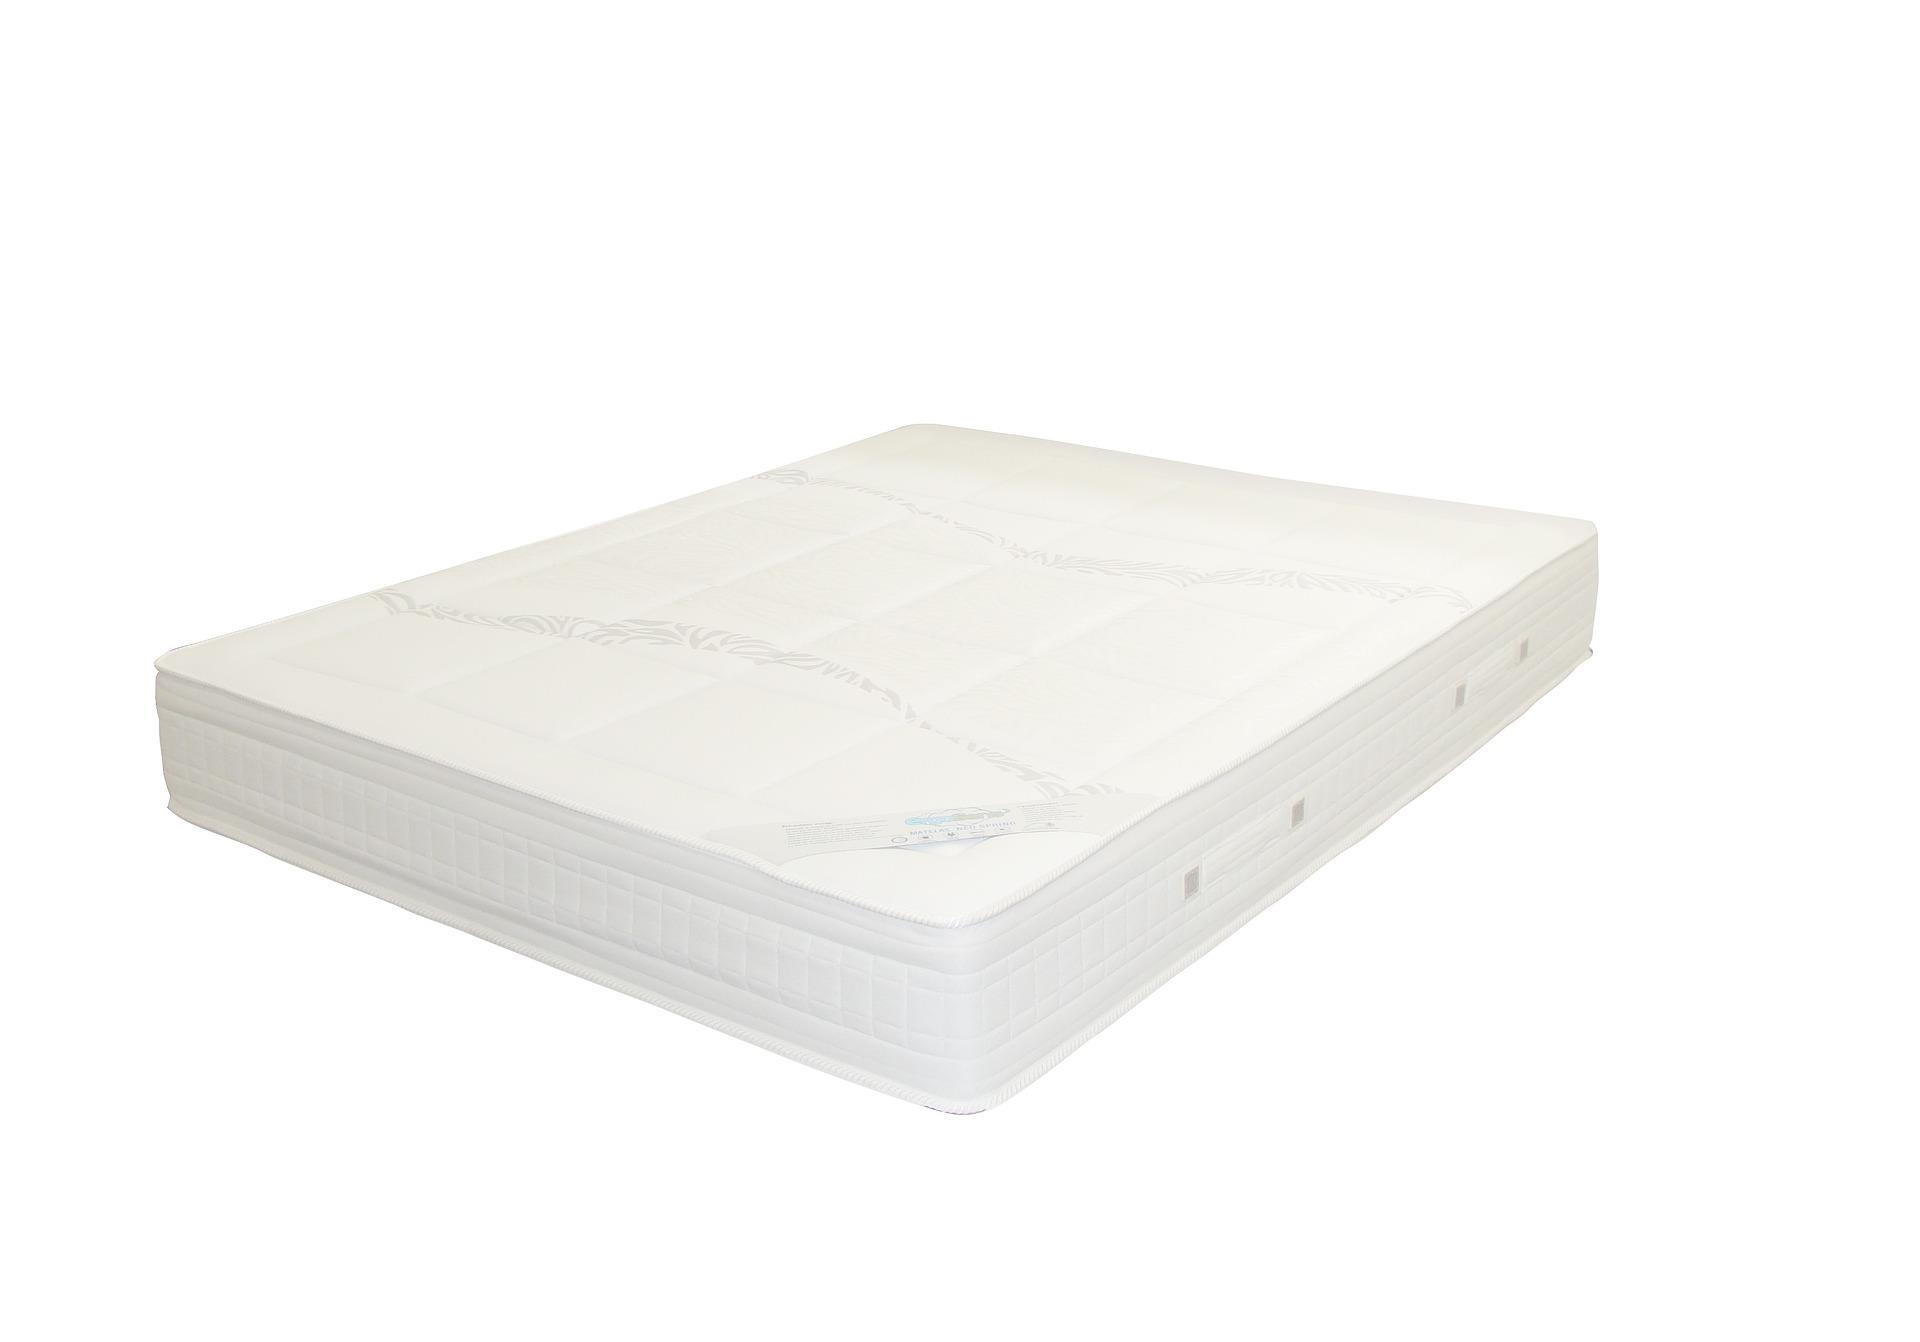 A Guide to the Best Mattress for Back Pain In 2019